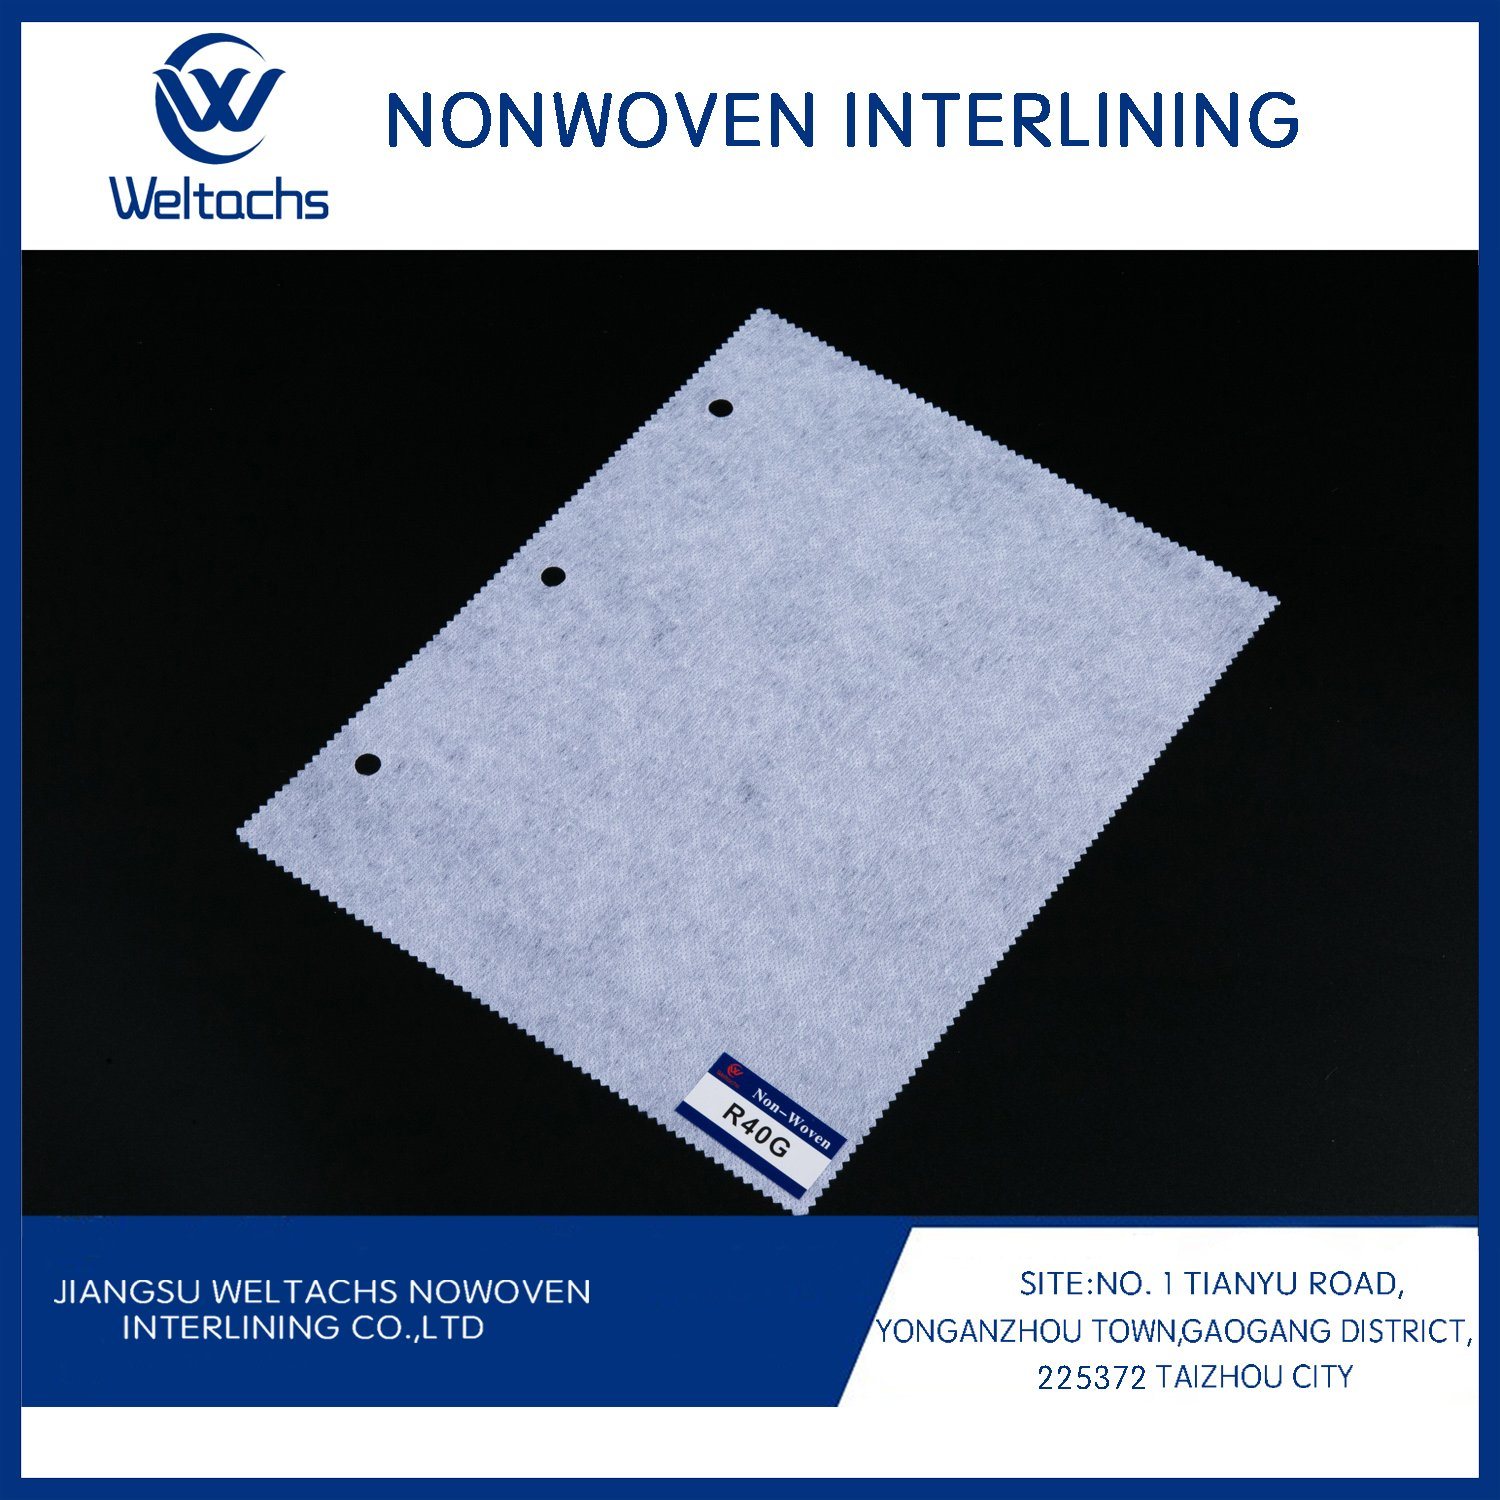 Manufacturing Air Filter Hydroponic Grow Room Activated Carbon Nonwoven Filter Fabric